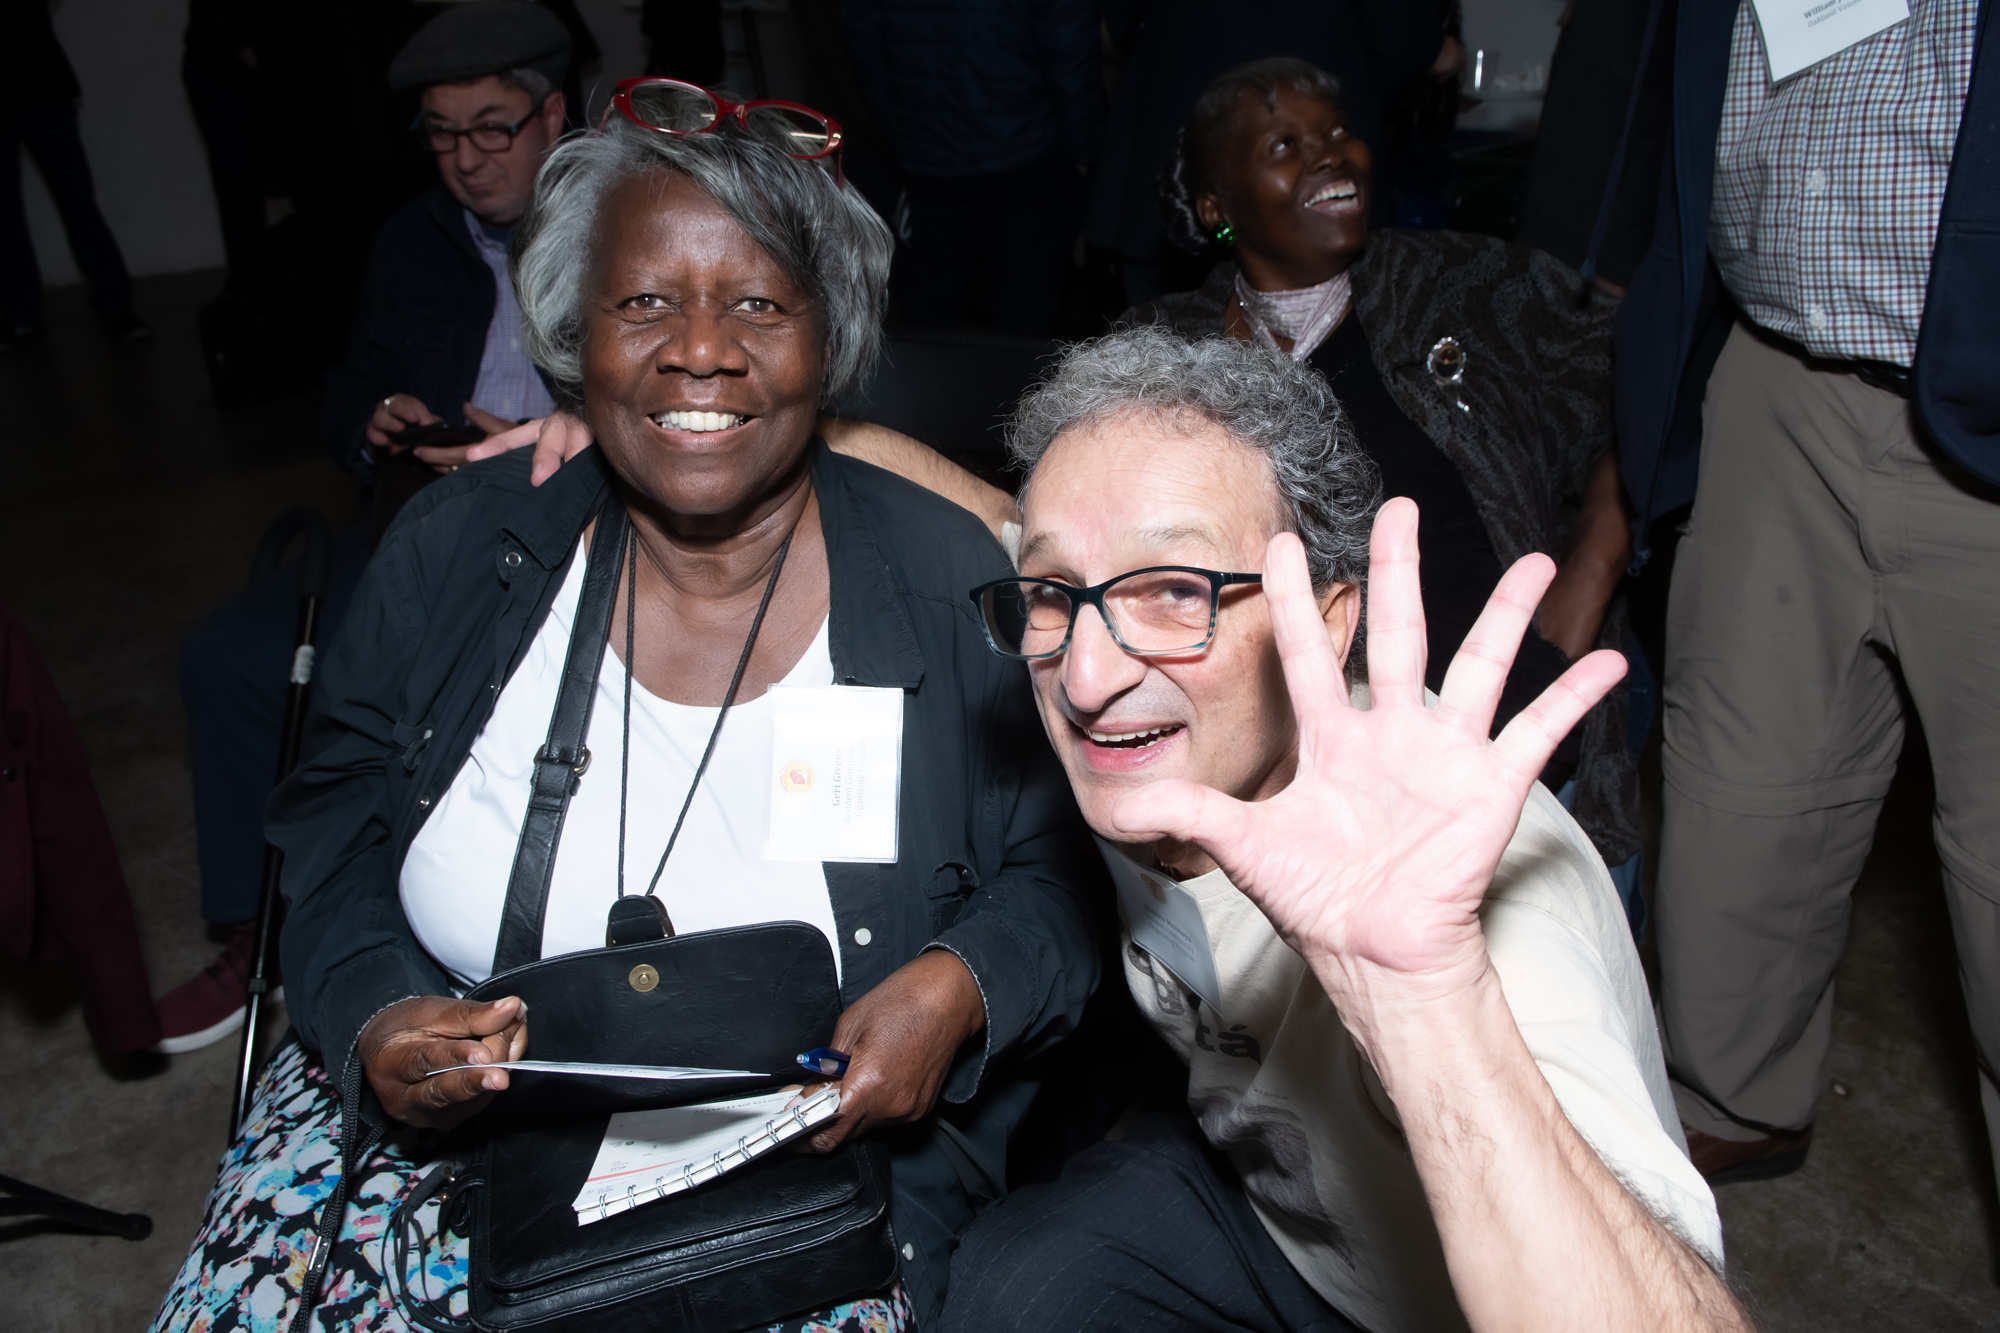 Two members of EBHO's Regional Community Organization Program pose for a photo at EBHO's 2019 Membership Meeting. The man sitting in front has five fingers raised to wave at the camera.